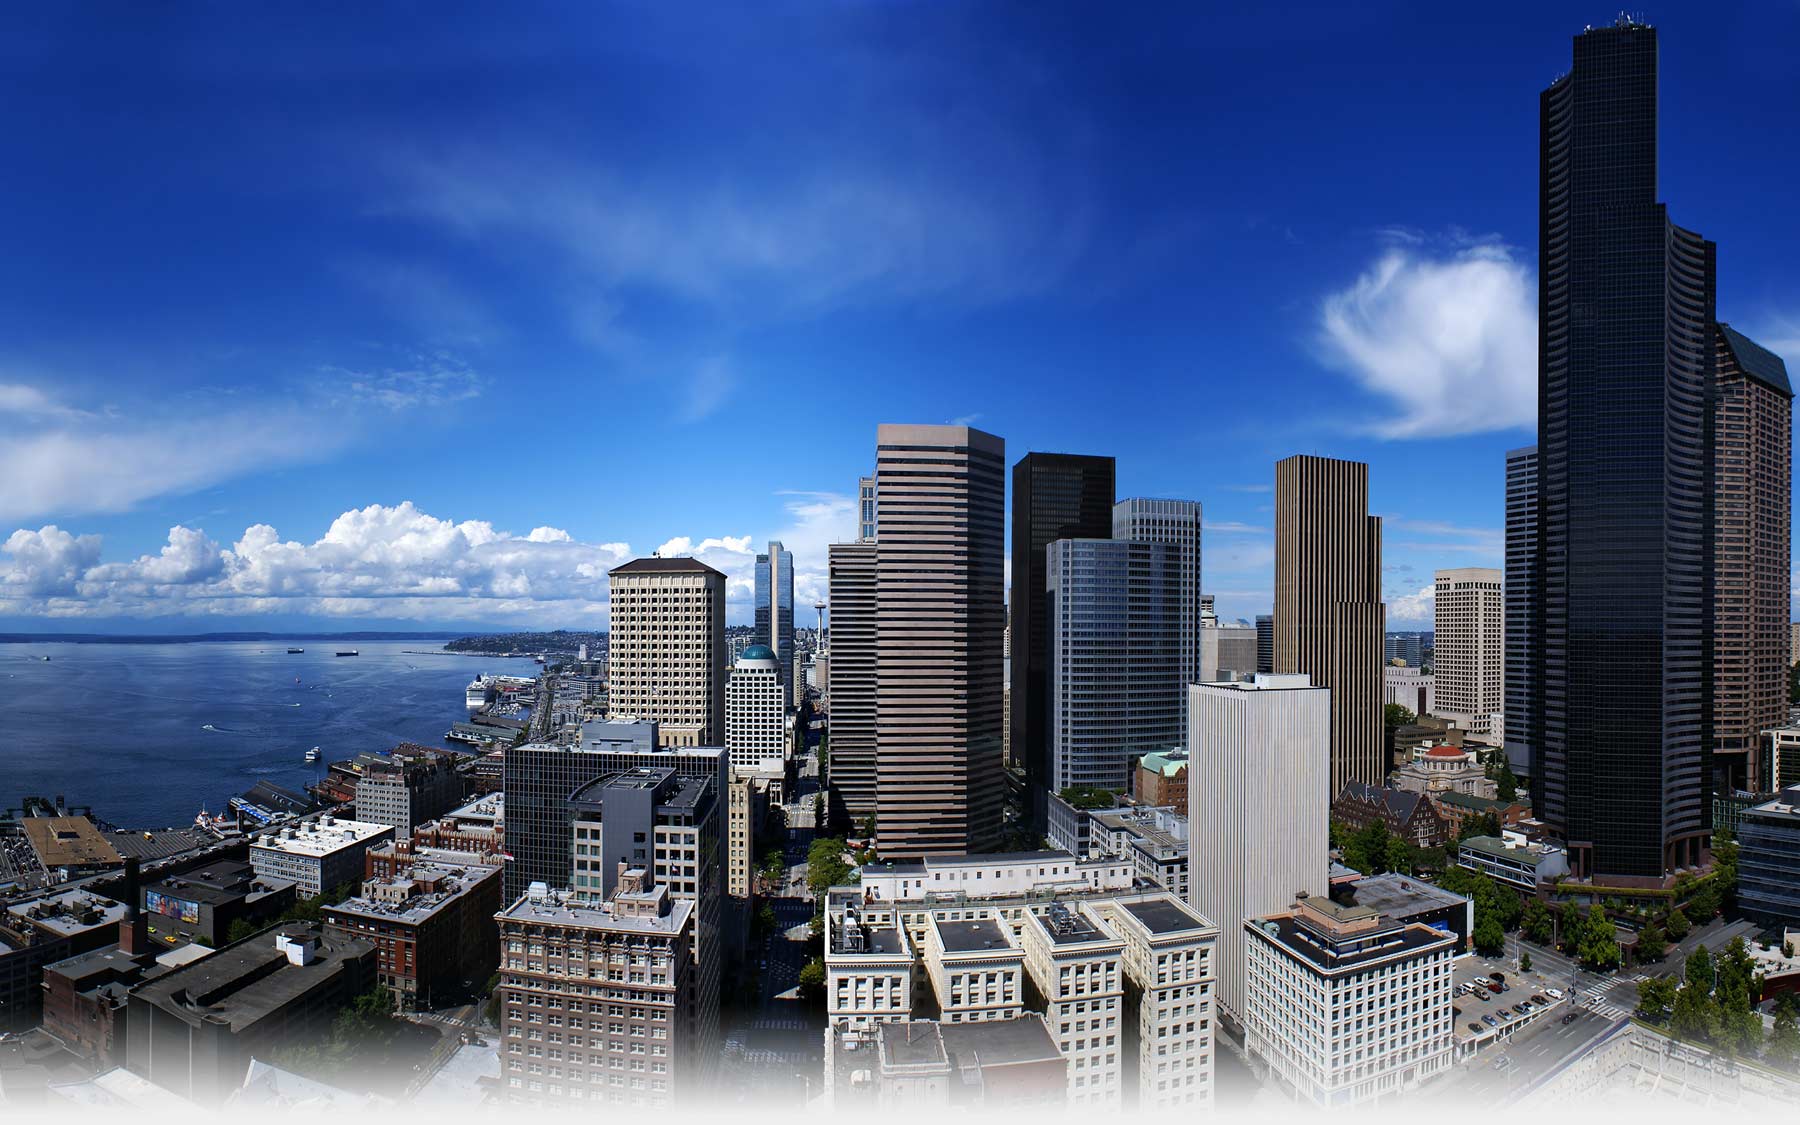 One-point perspective photograph of downtown Seattle, WA on a mostly sunny day